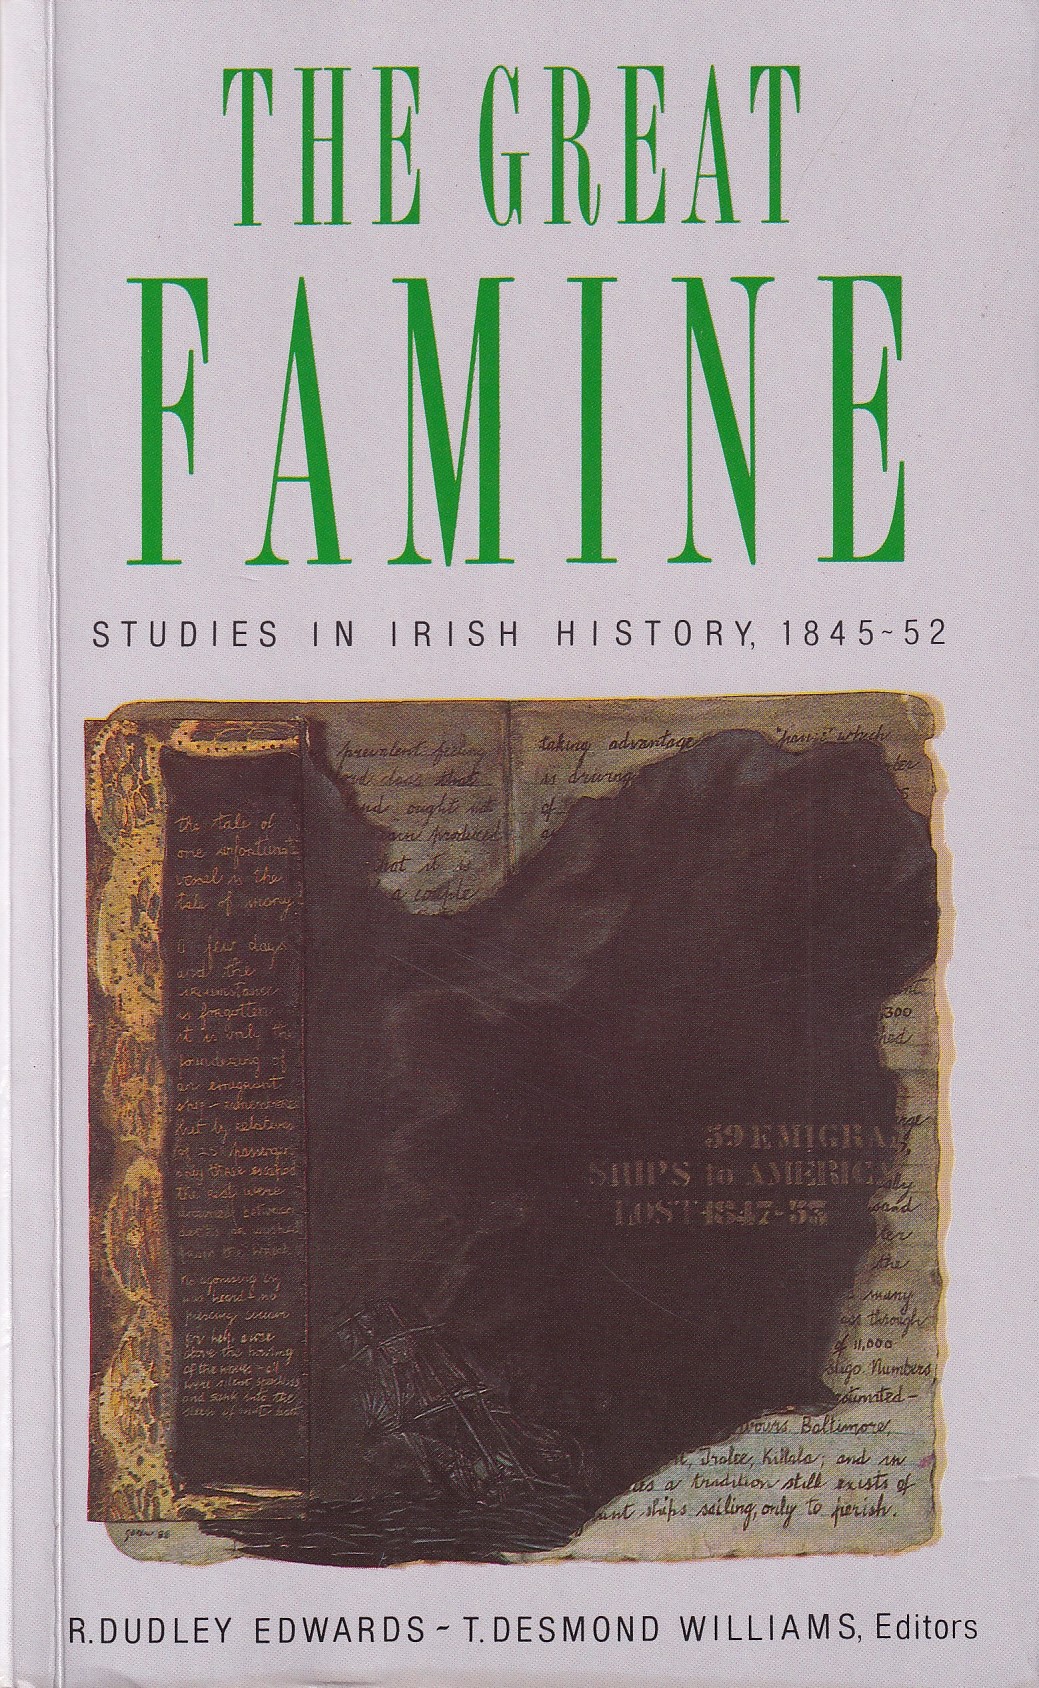 The Great Famine: Studies in Irish History, 1845-52 by R. Dudley Edwards & T. Desmond Williams (eds.)